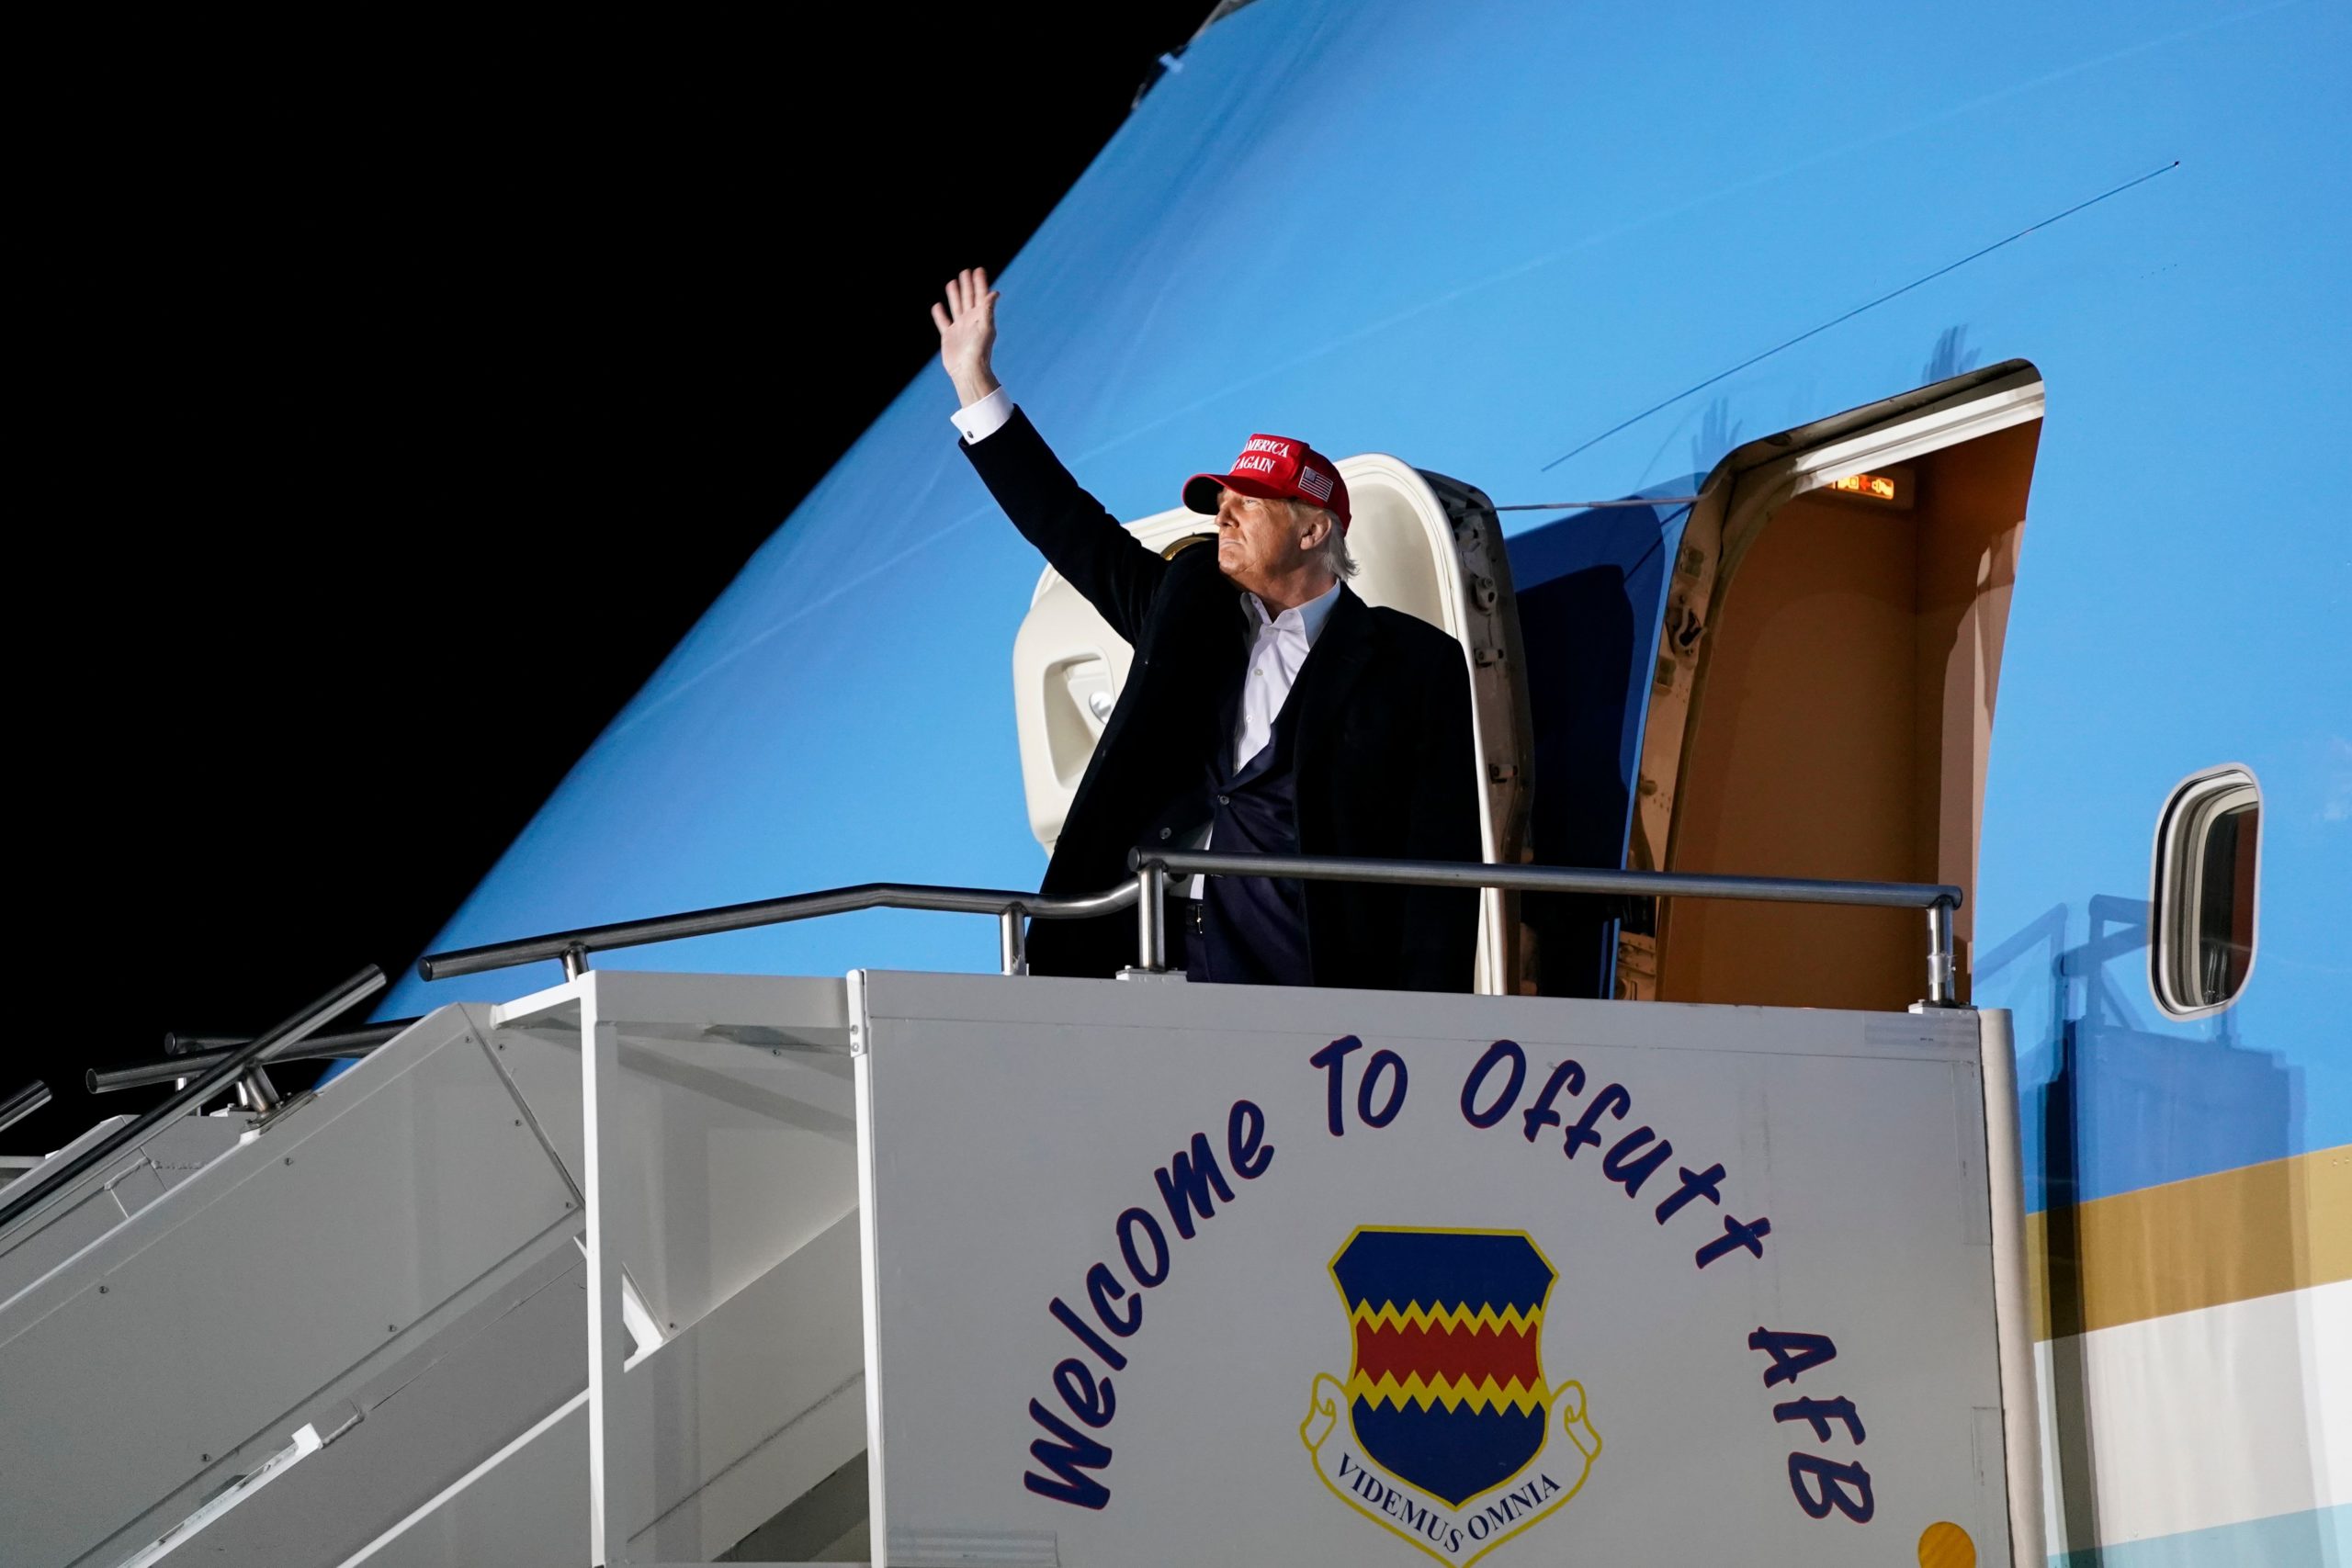 U.S. President Donald Trump waves as he boards Air Force One after addressing supporters at a Make America Great Again campaign event at Des Moines International Airport in Iowa on Oct. (Alex Edelman/AFP via Getty Images)